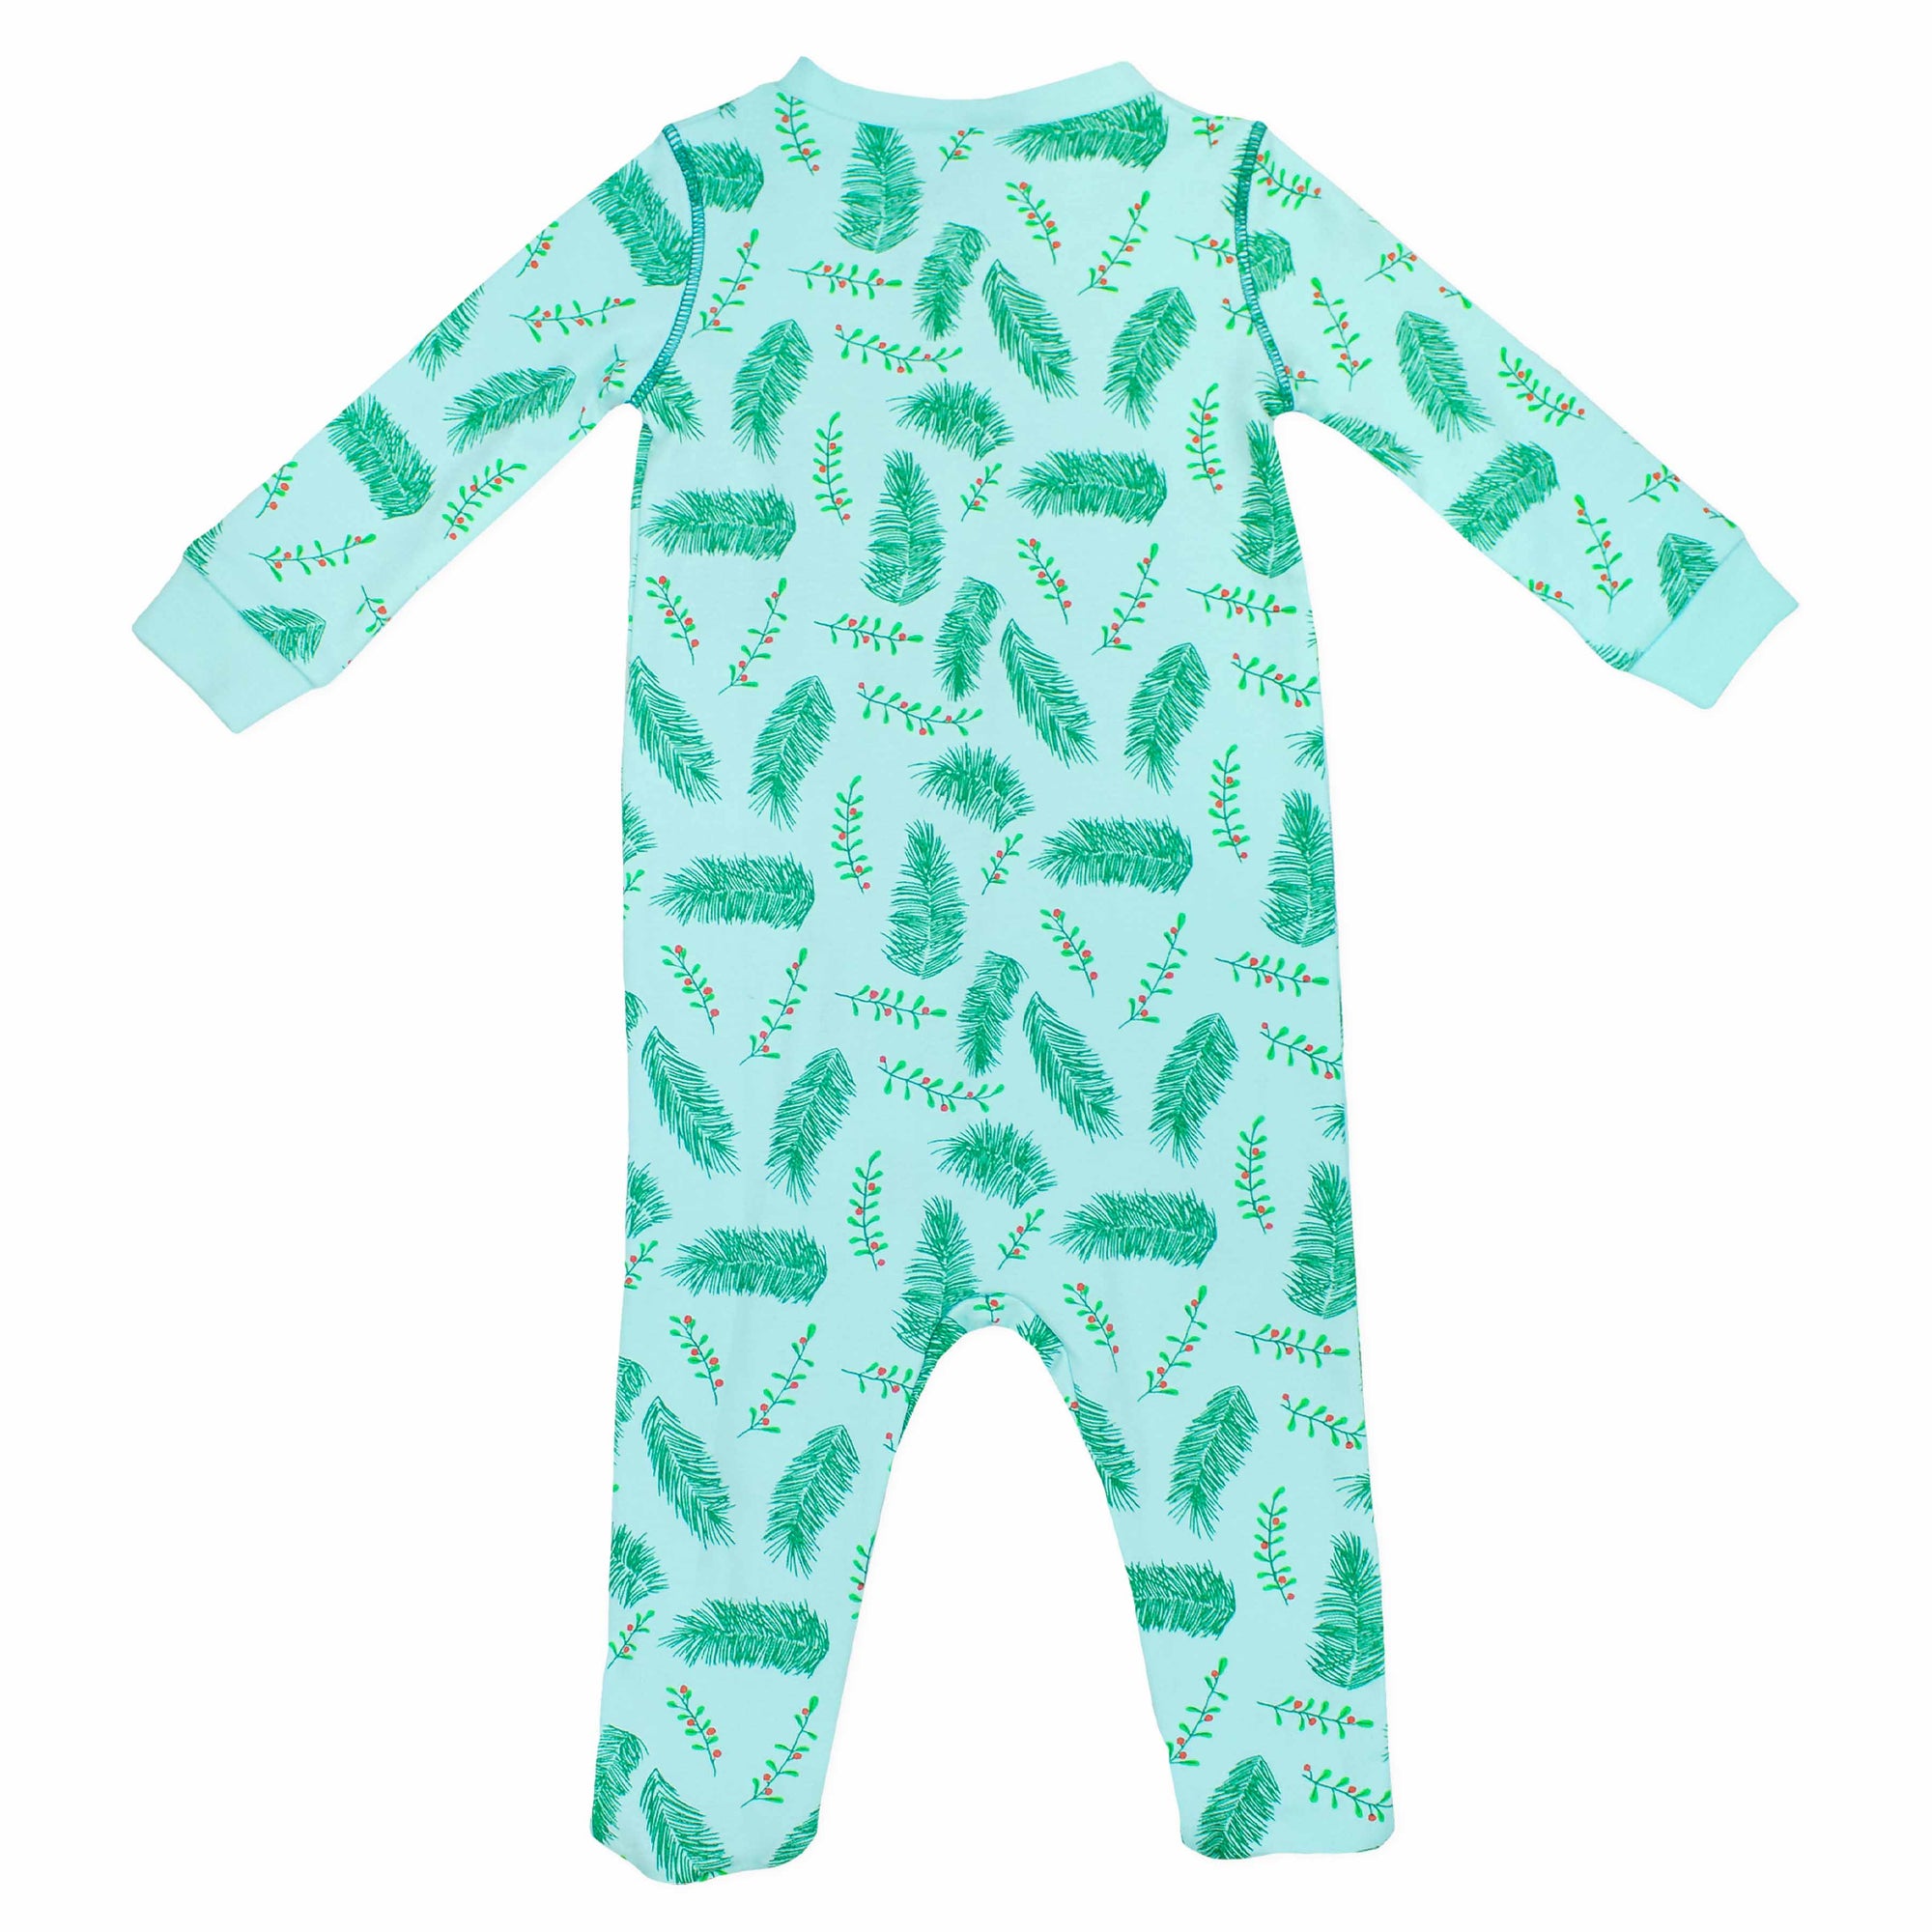 Light blue footed pajama with vintage Christmas holly pattern made in pima cotton - back view